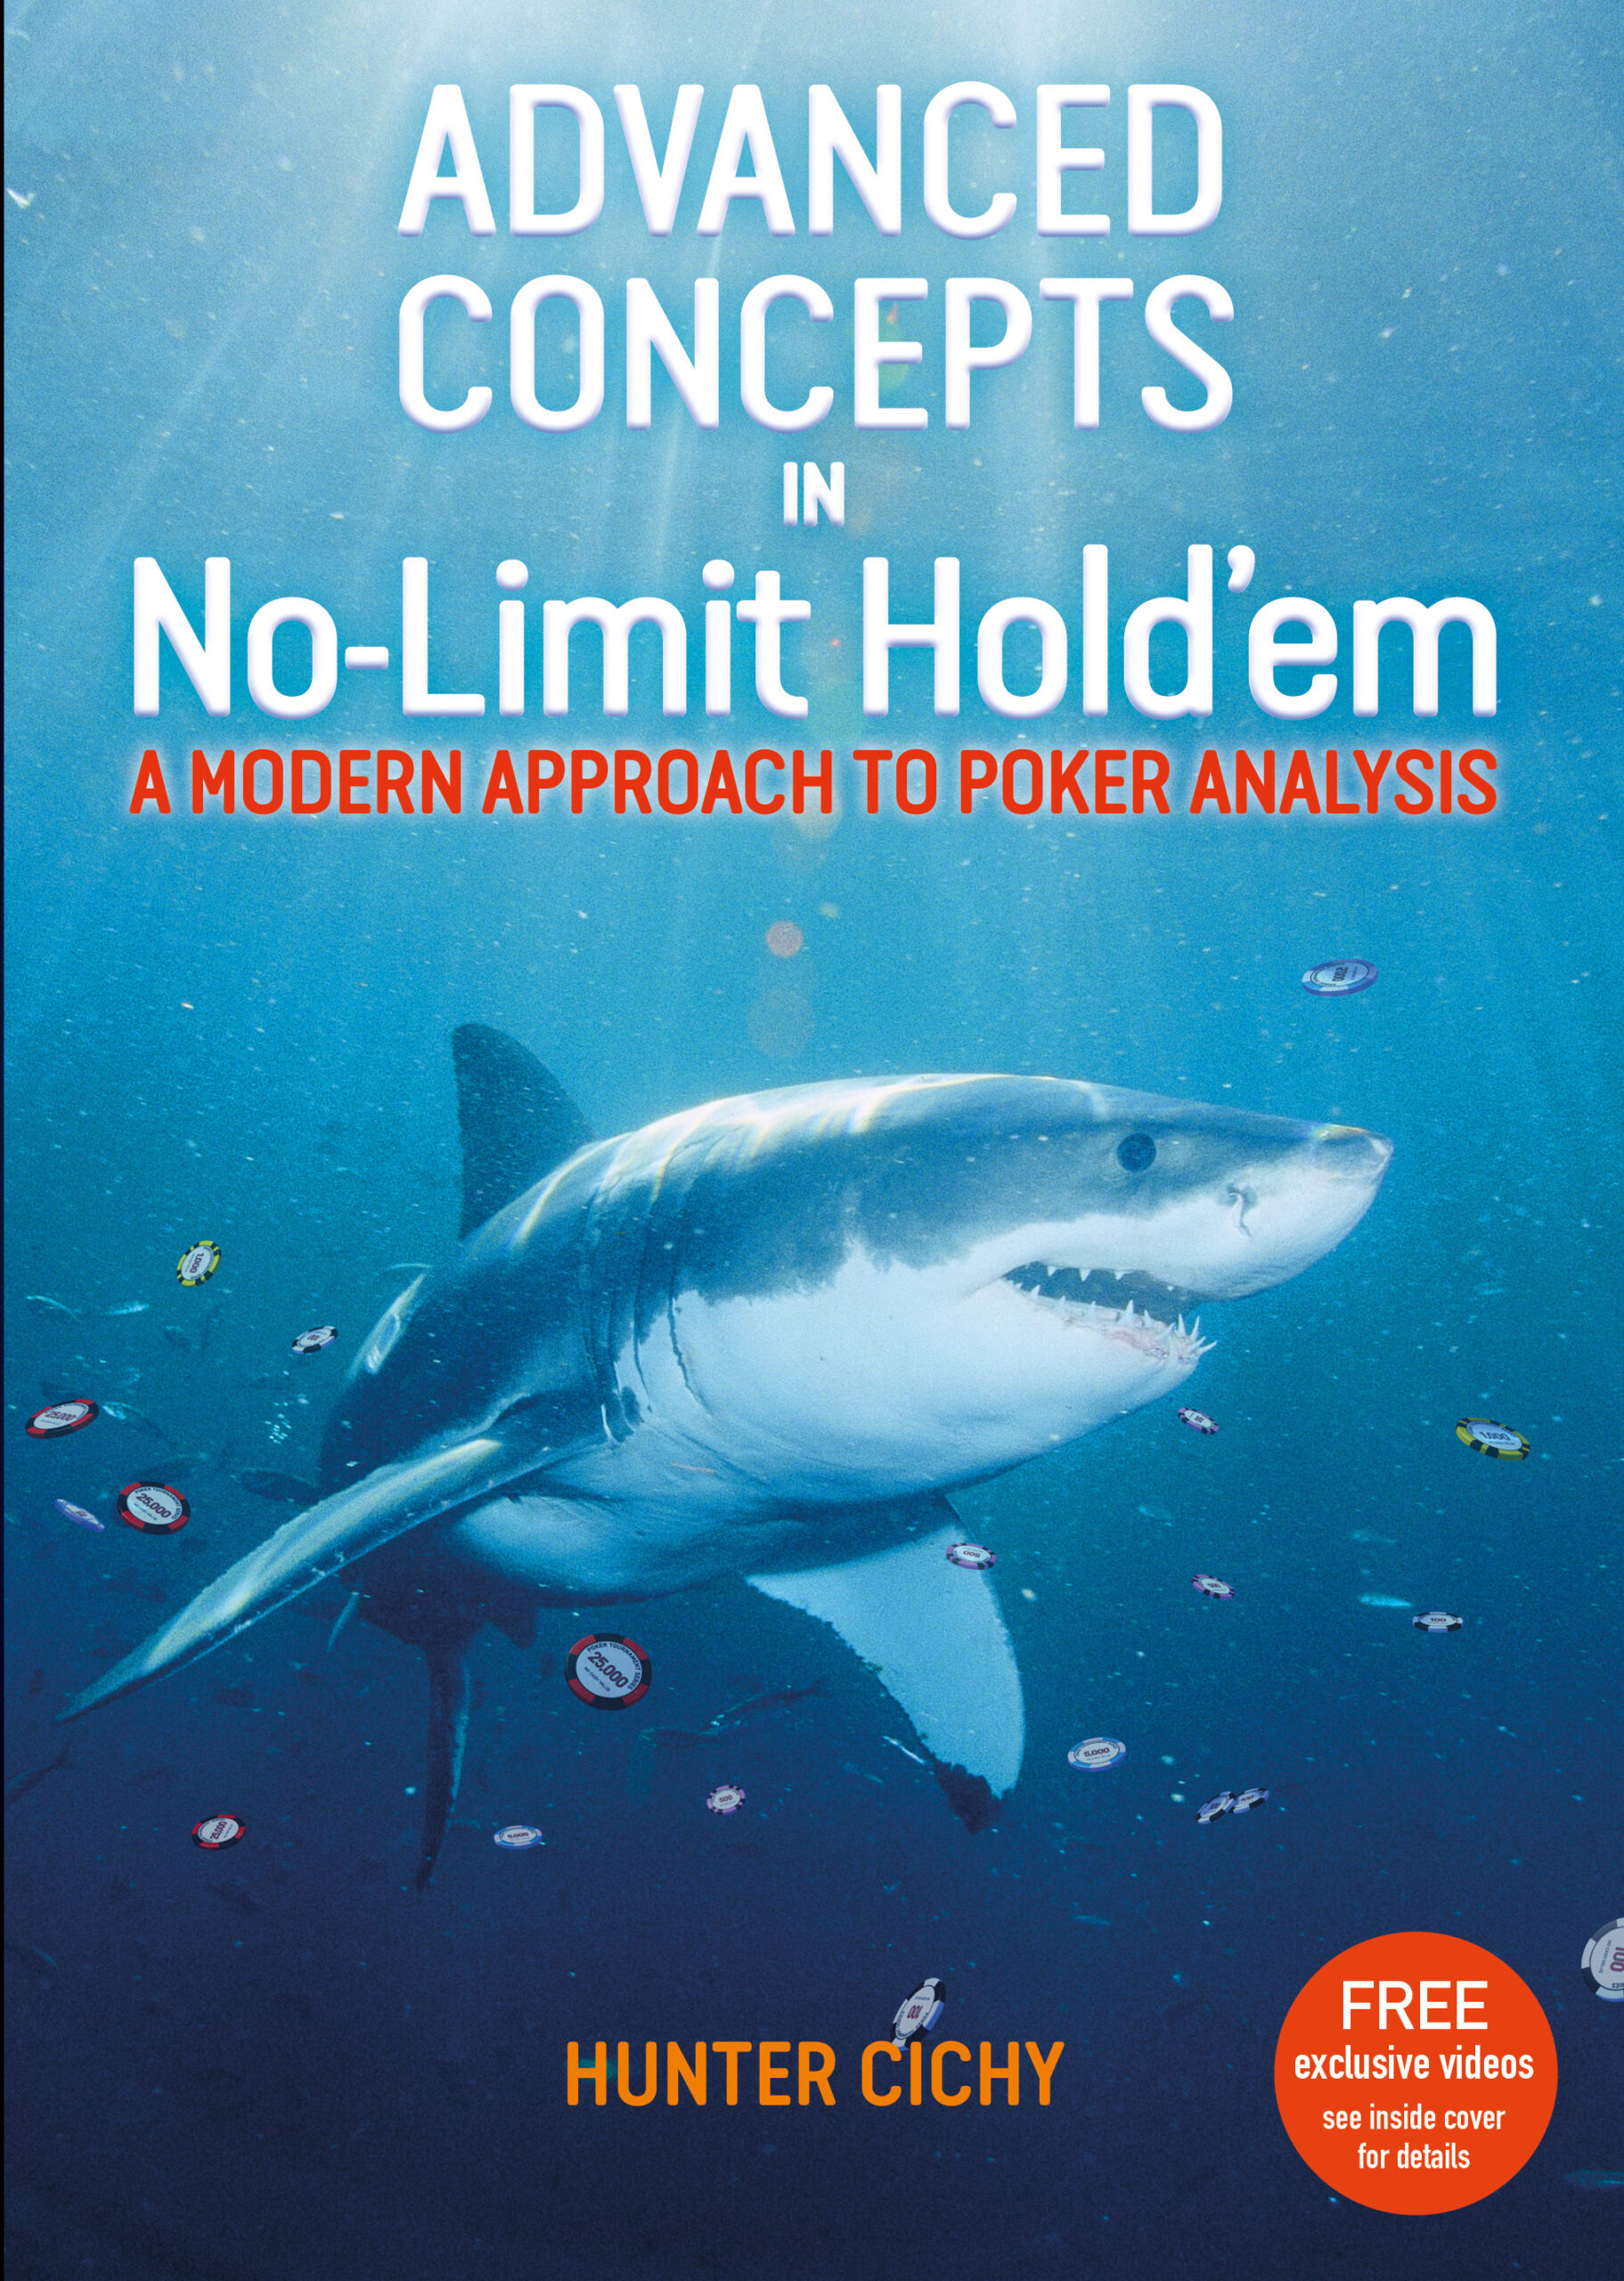 Book Review: ‘Advanced Concepts in No-Limit Hold’em’ Offers Solid Game Theory Info You Can Use